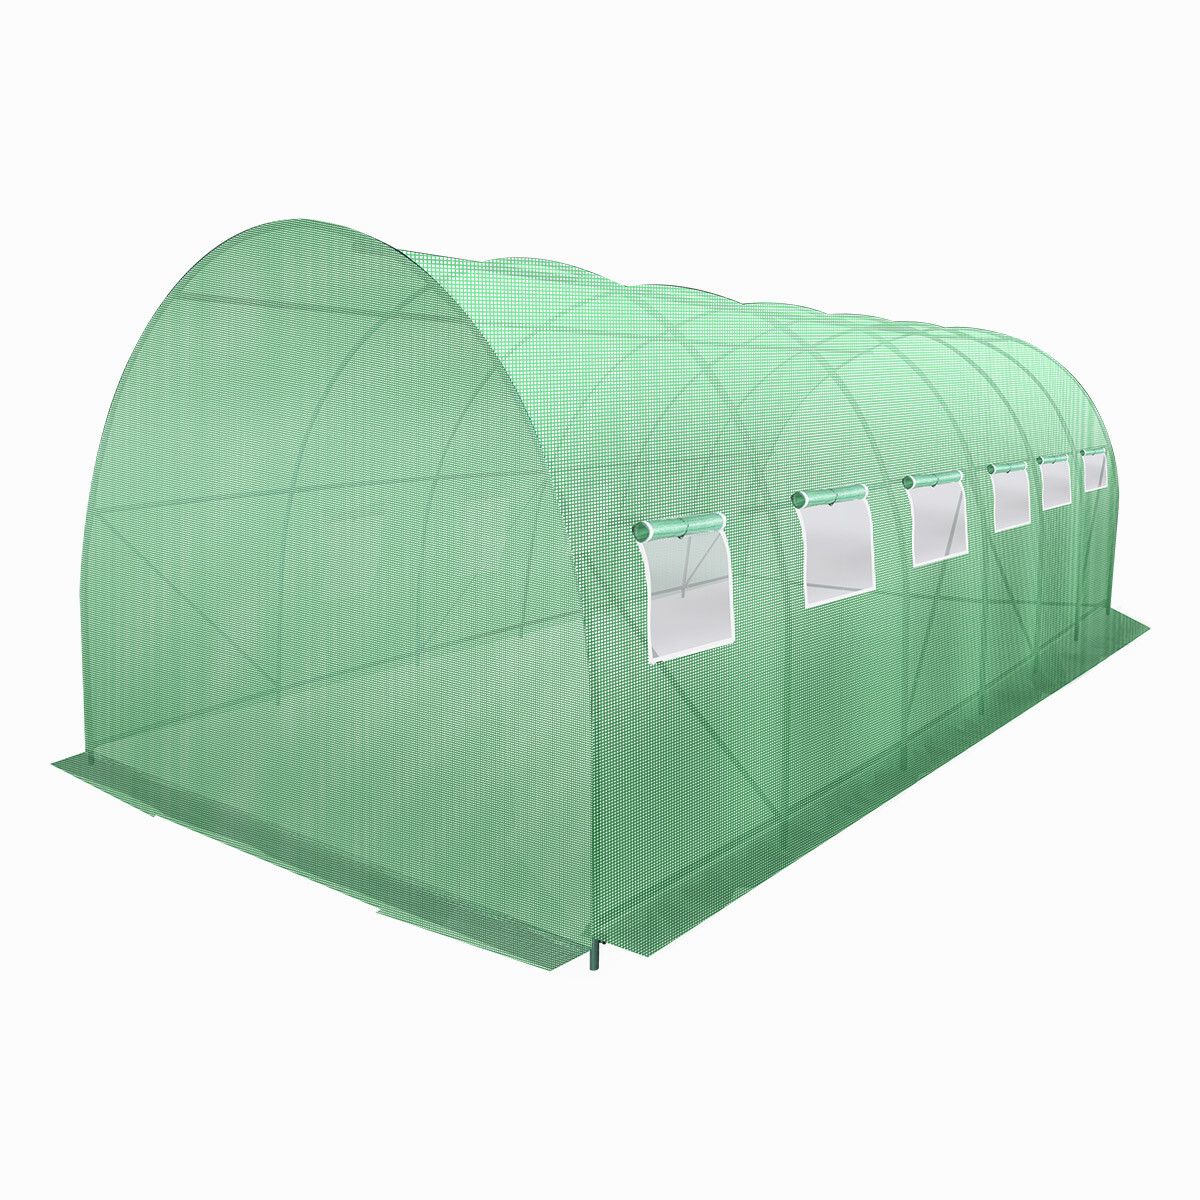 Portable Walk-In Greenhouse - Two Sizes Avaialble